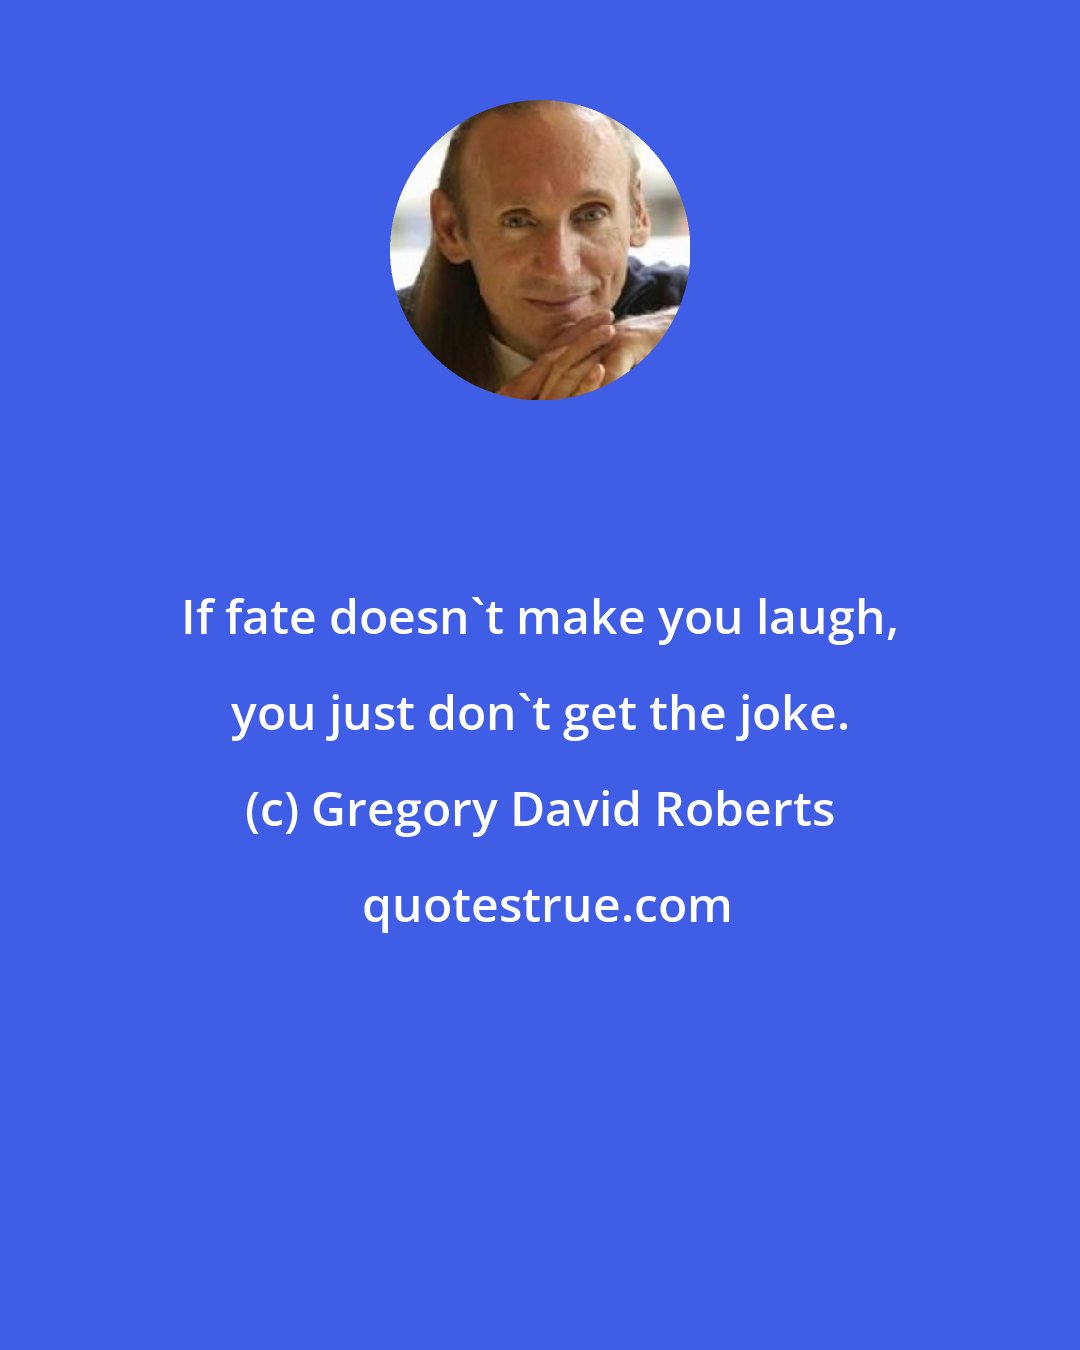 Gregory David Roberts: If fate doesn't make you laugh, you just don't get the joke.